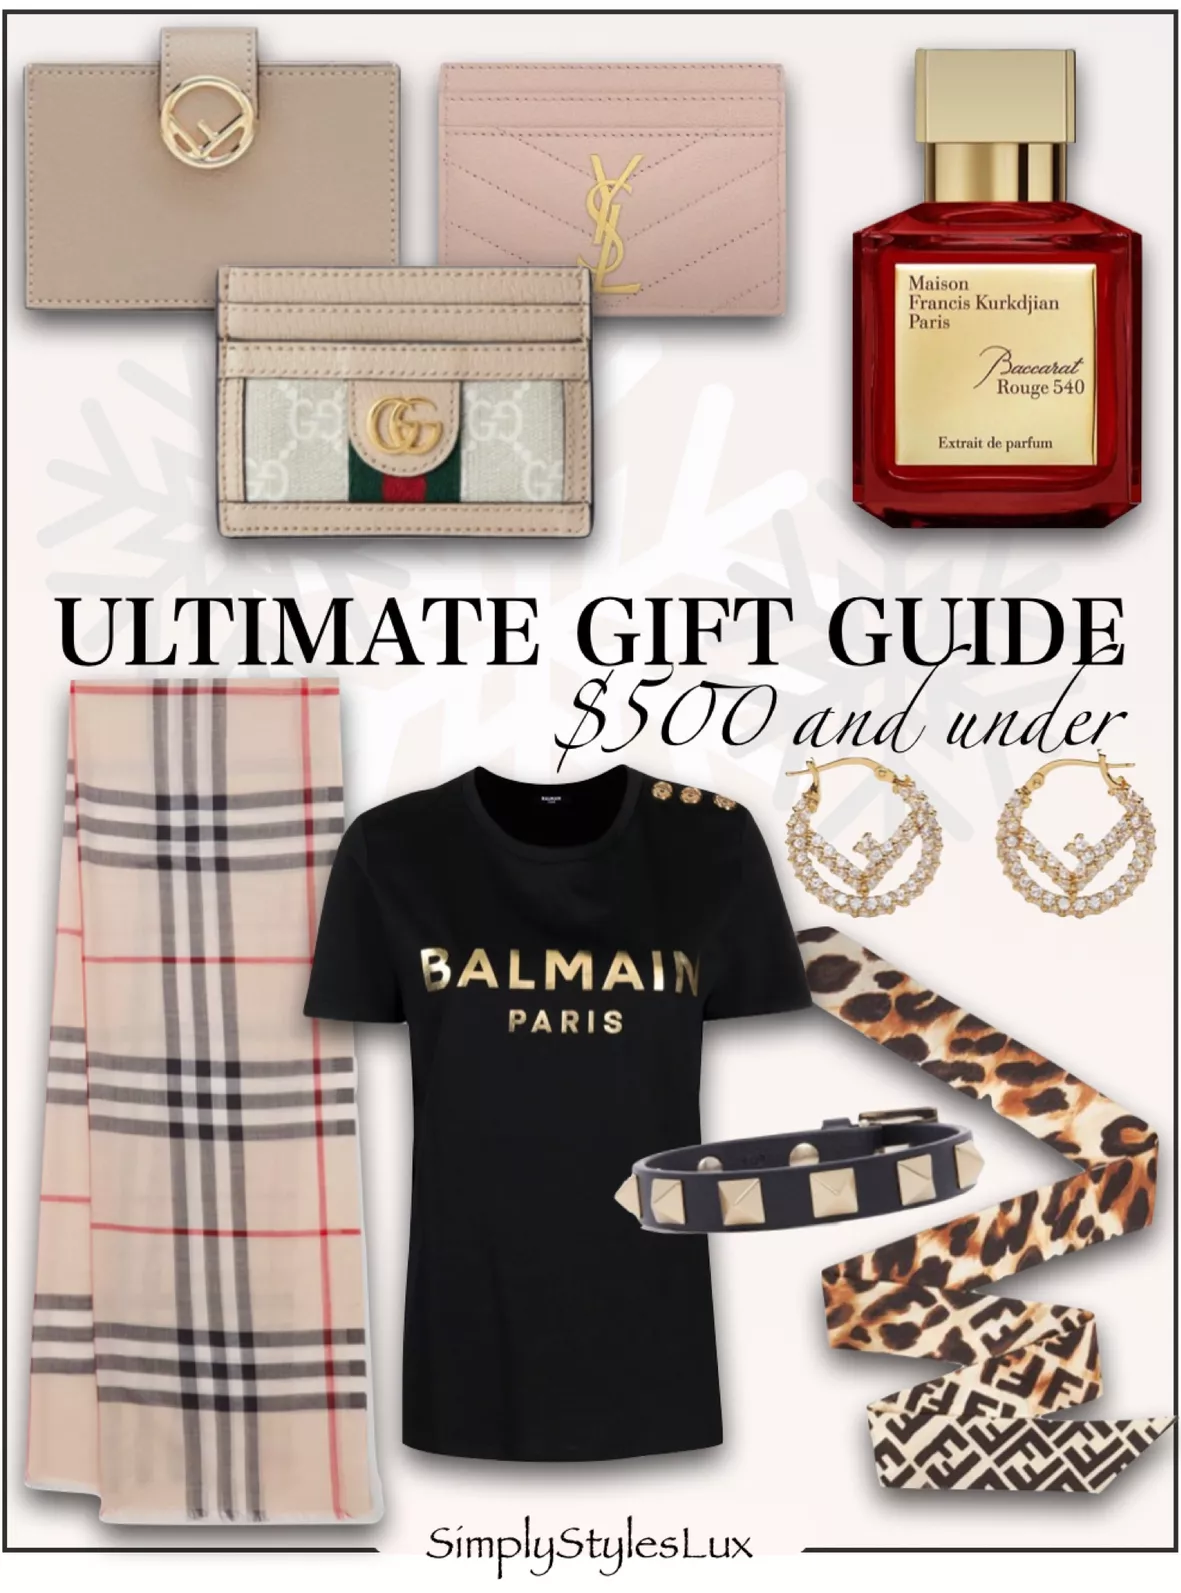 LOUIS VUITTON Gifts Under $500: Ultimate Guide